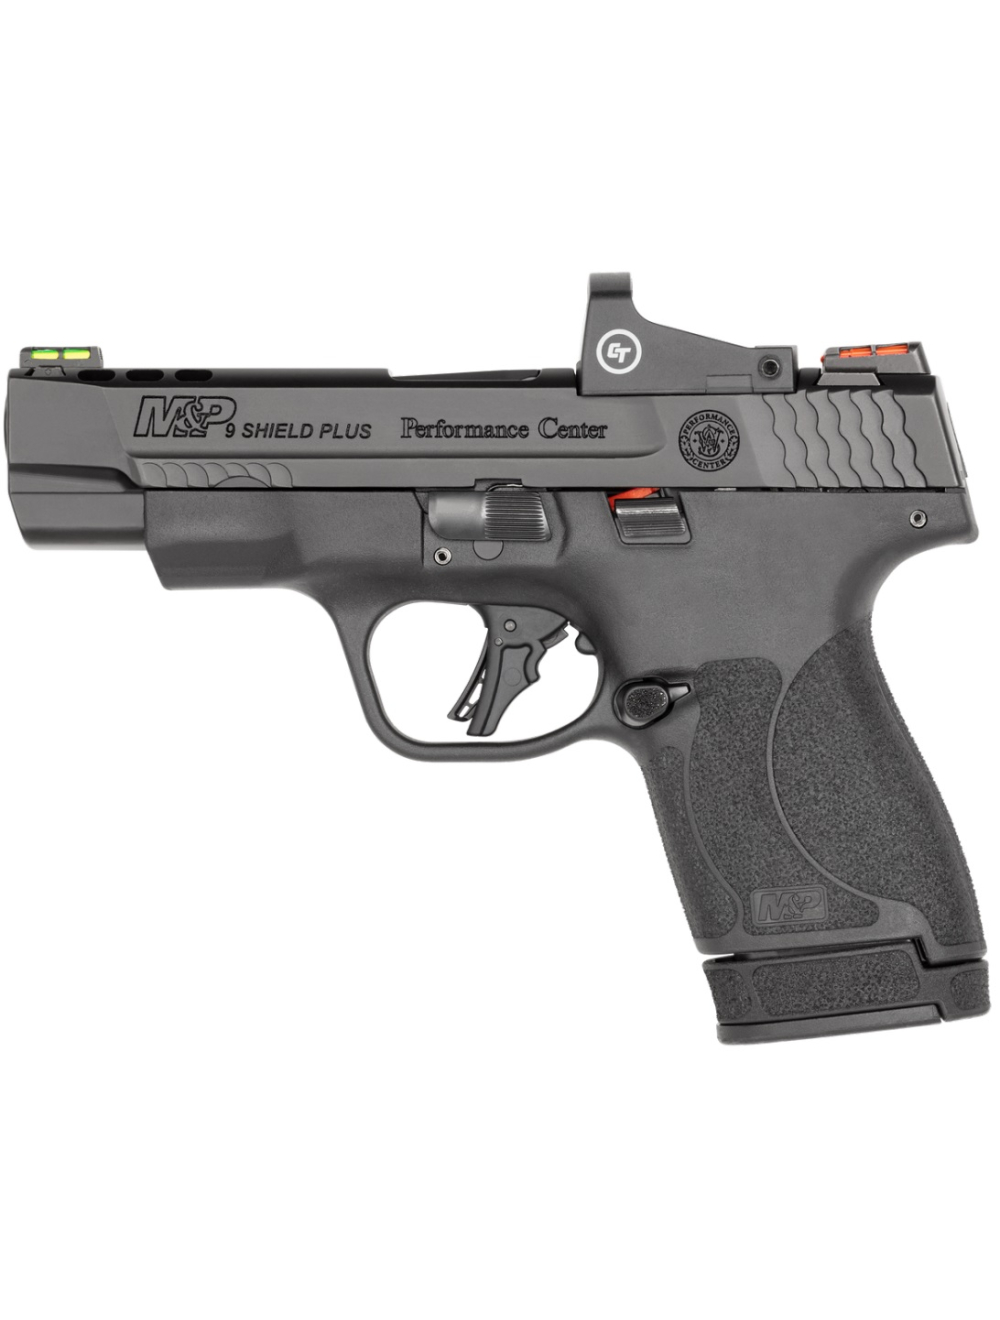 Smith & Wesson Performance Center M&P9 Shield Plus Pistol With Crimson Trace Red Dot 4,